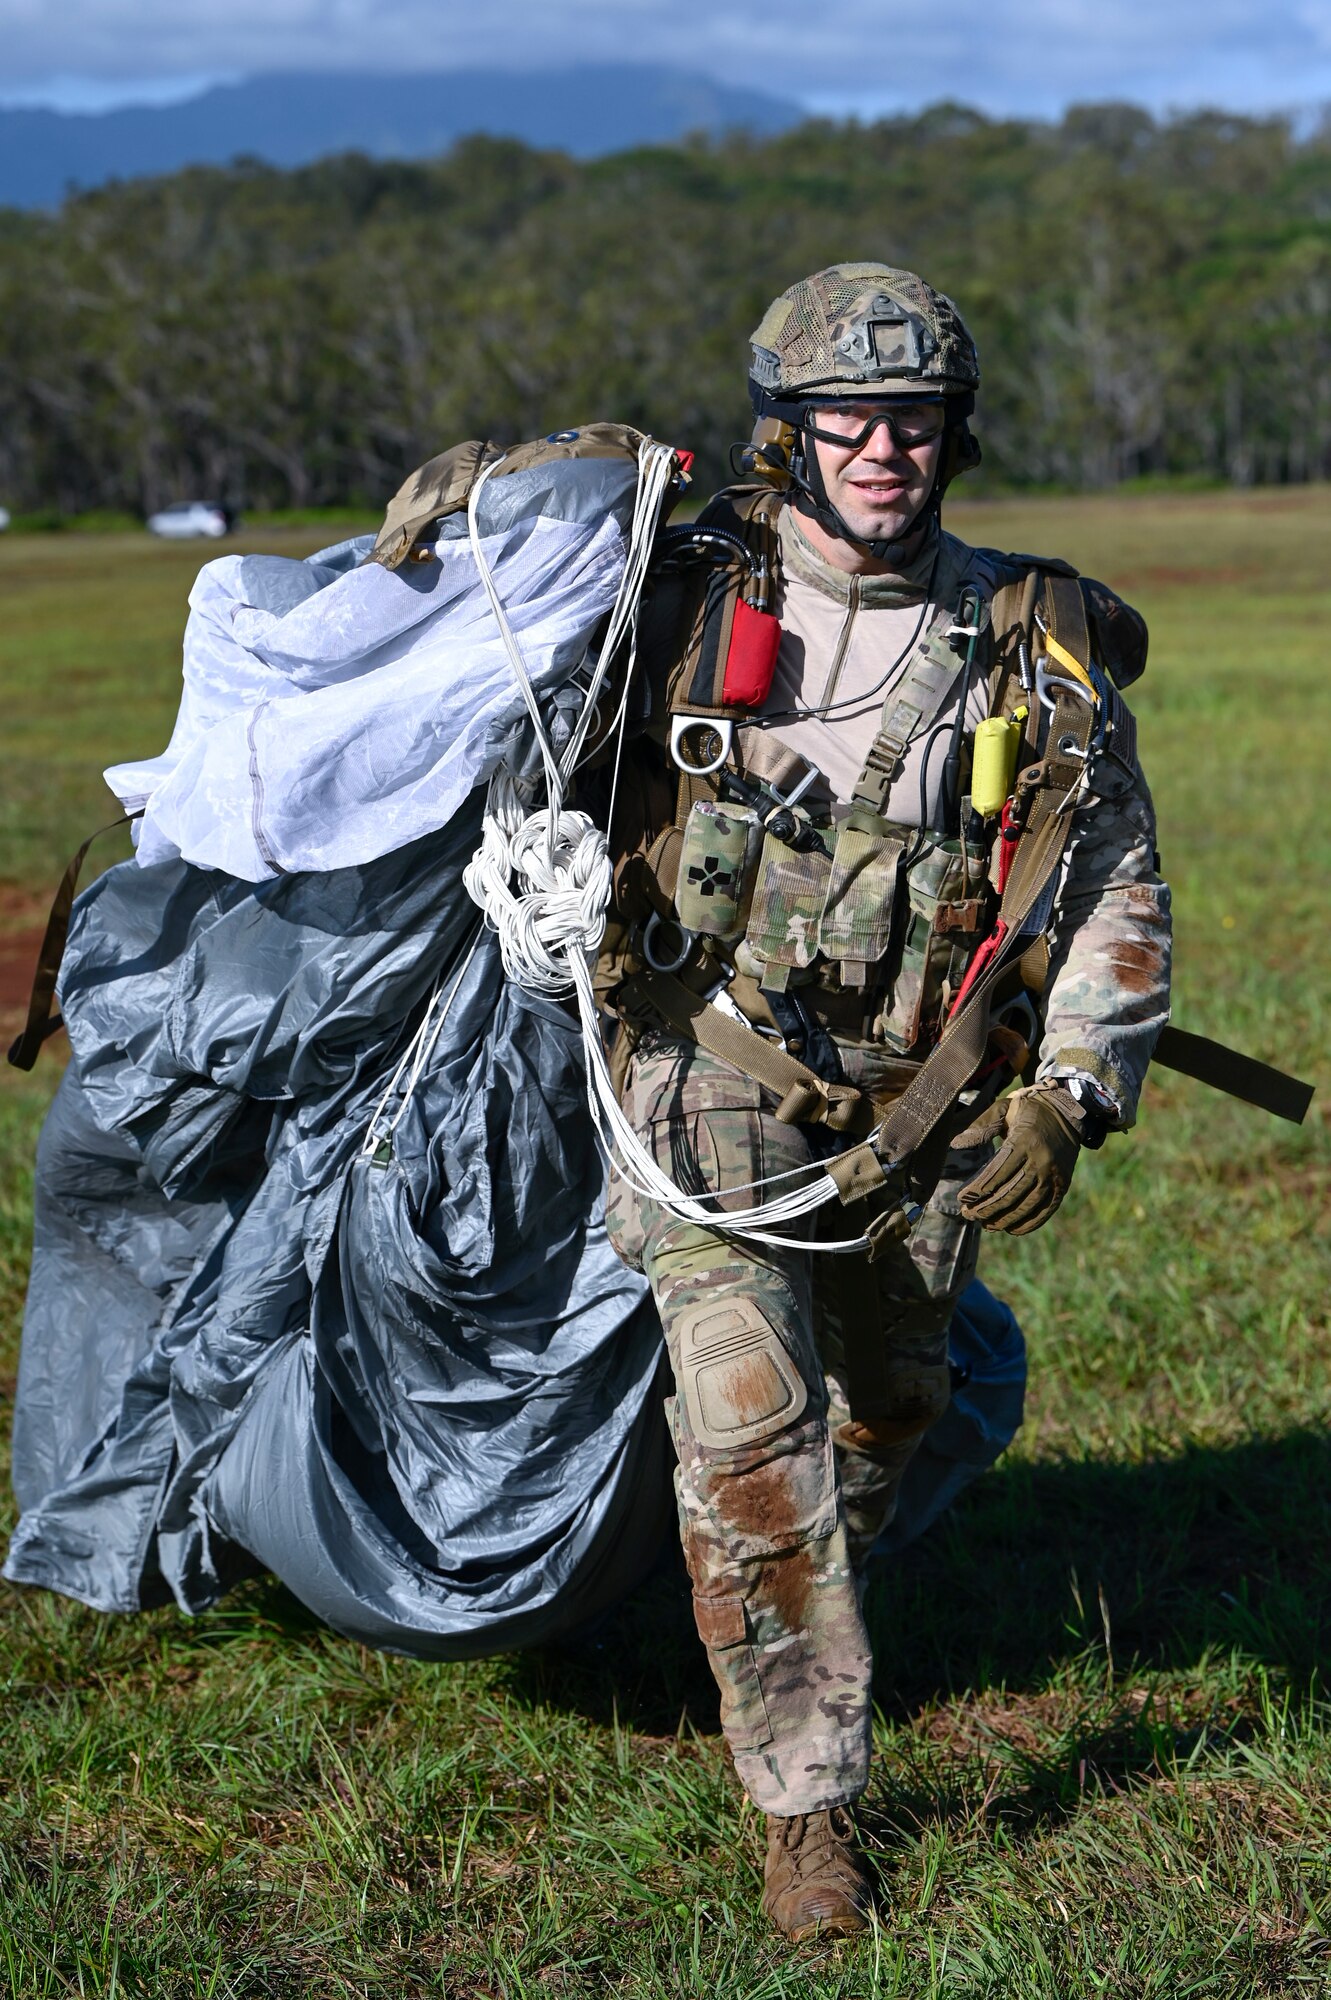 An Air force Combat Rescue Officer recovers his parachute after a freefall jump from an AATC C-130 as part of training during Exercise KANI WILDCAT.